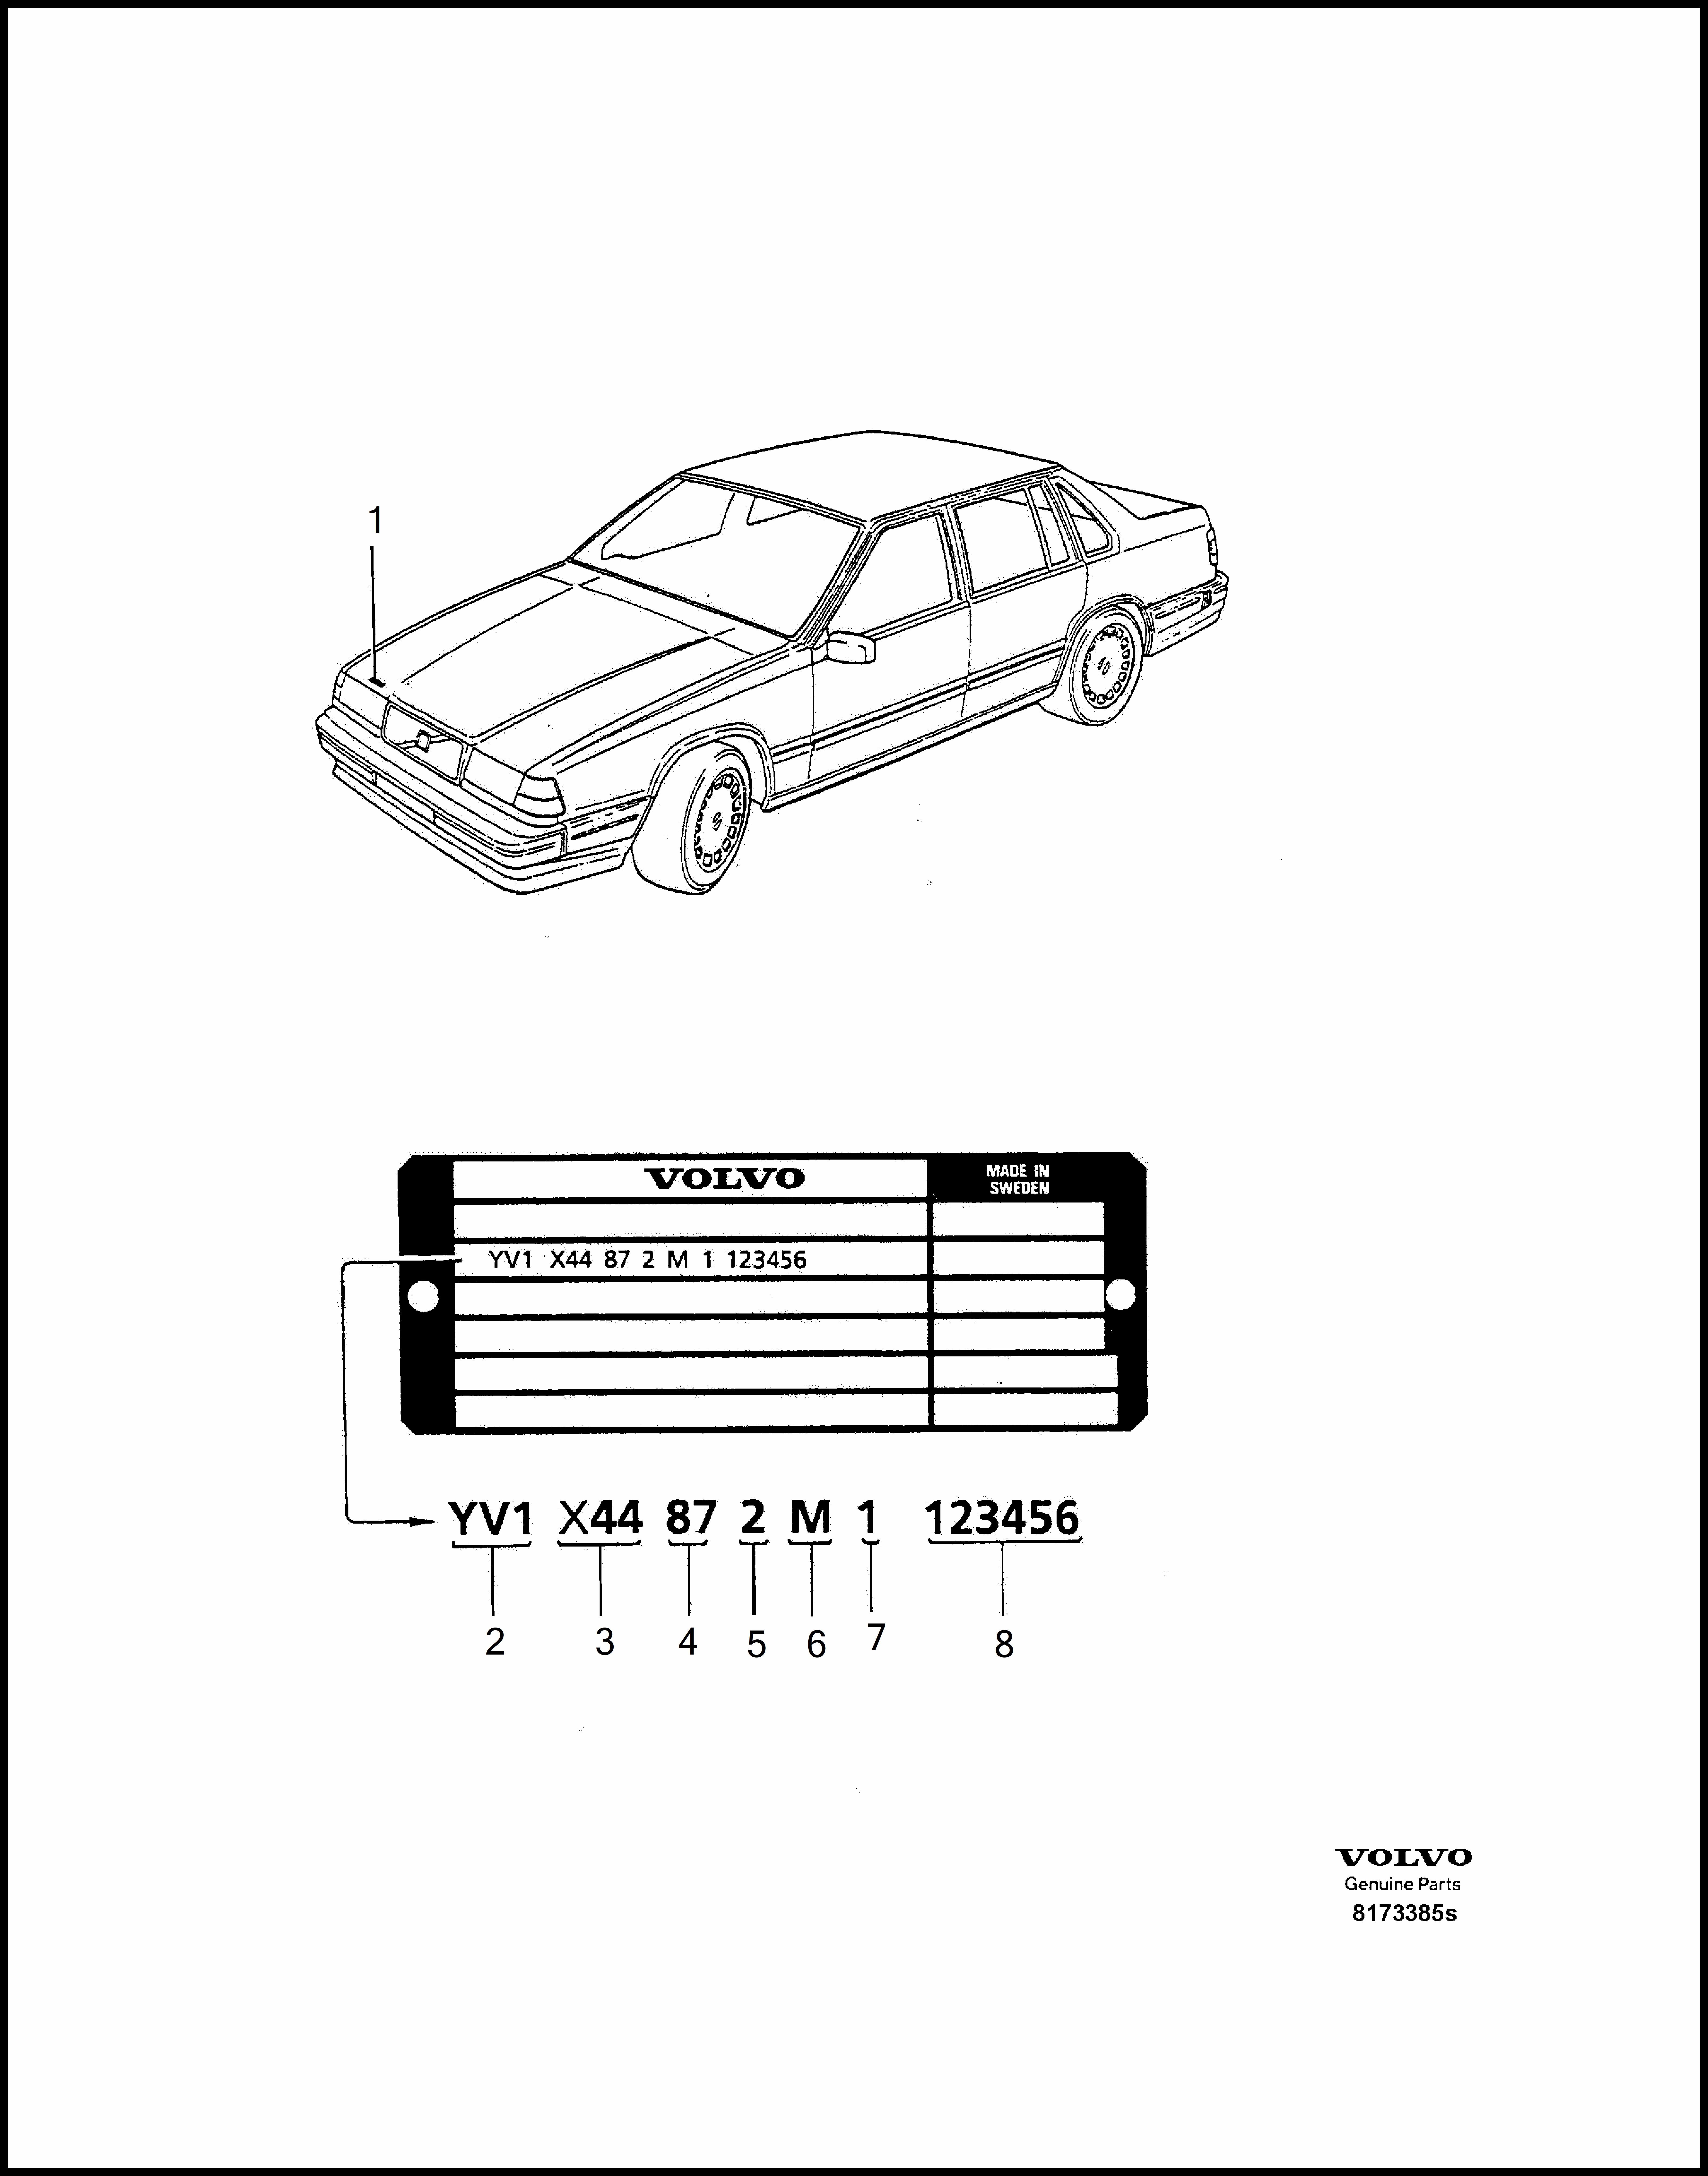 identification plate pour Volvo 960 960